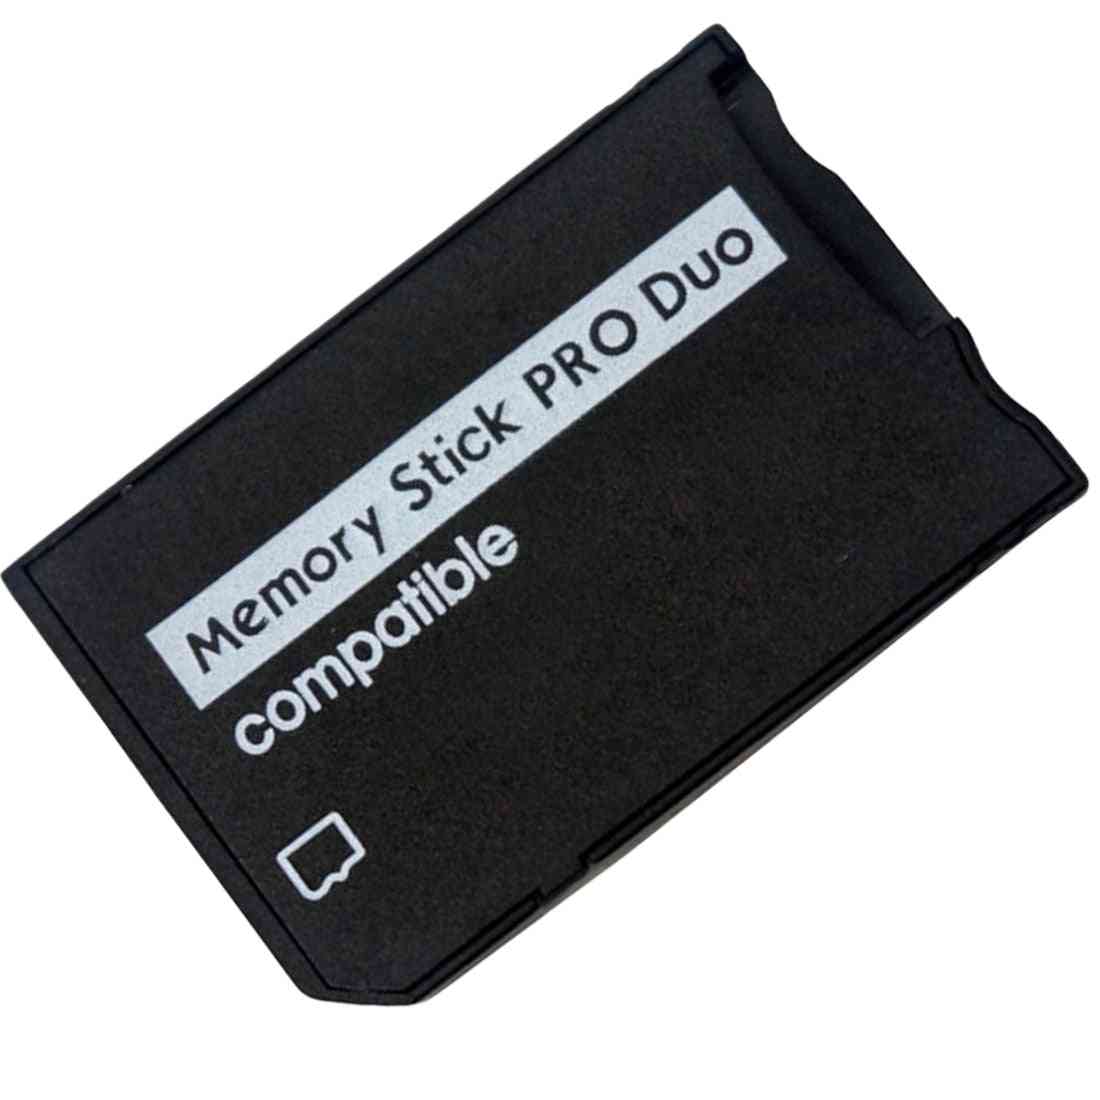 Memory Card Adapter For Micro Sd To Ms Pro Duo